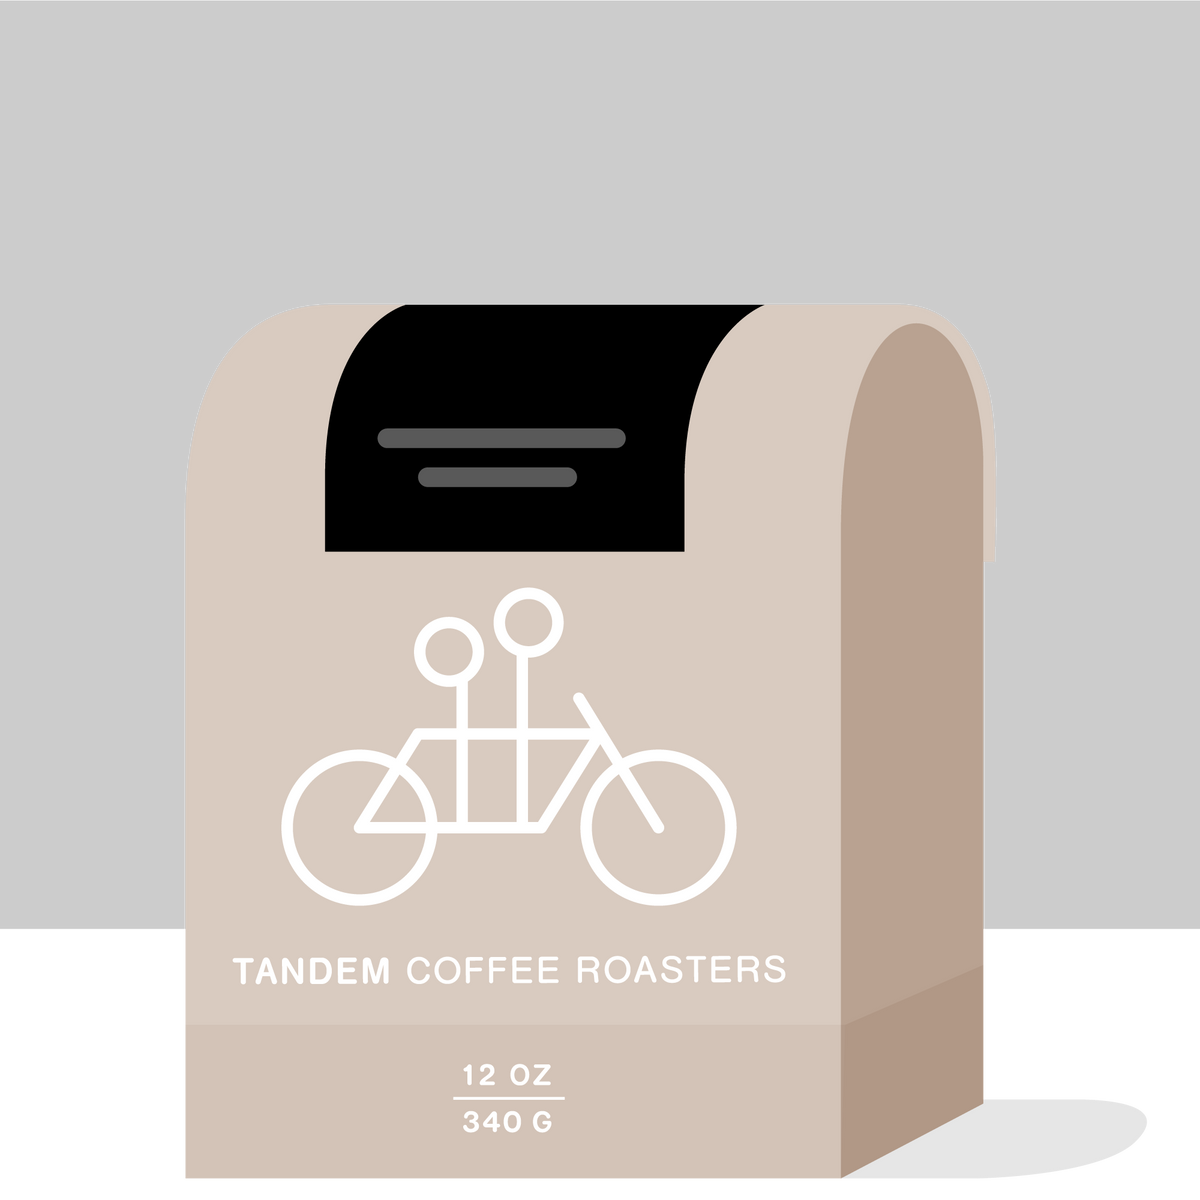 Illustration of a grey coffee bag with a white bicycle logo. The bag is labeled "Tandem Coffee Roasters" and "12 oz, 340 g Whole Bean Test Batch." It has a handle.